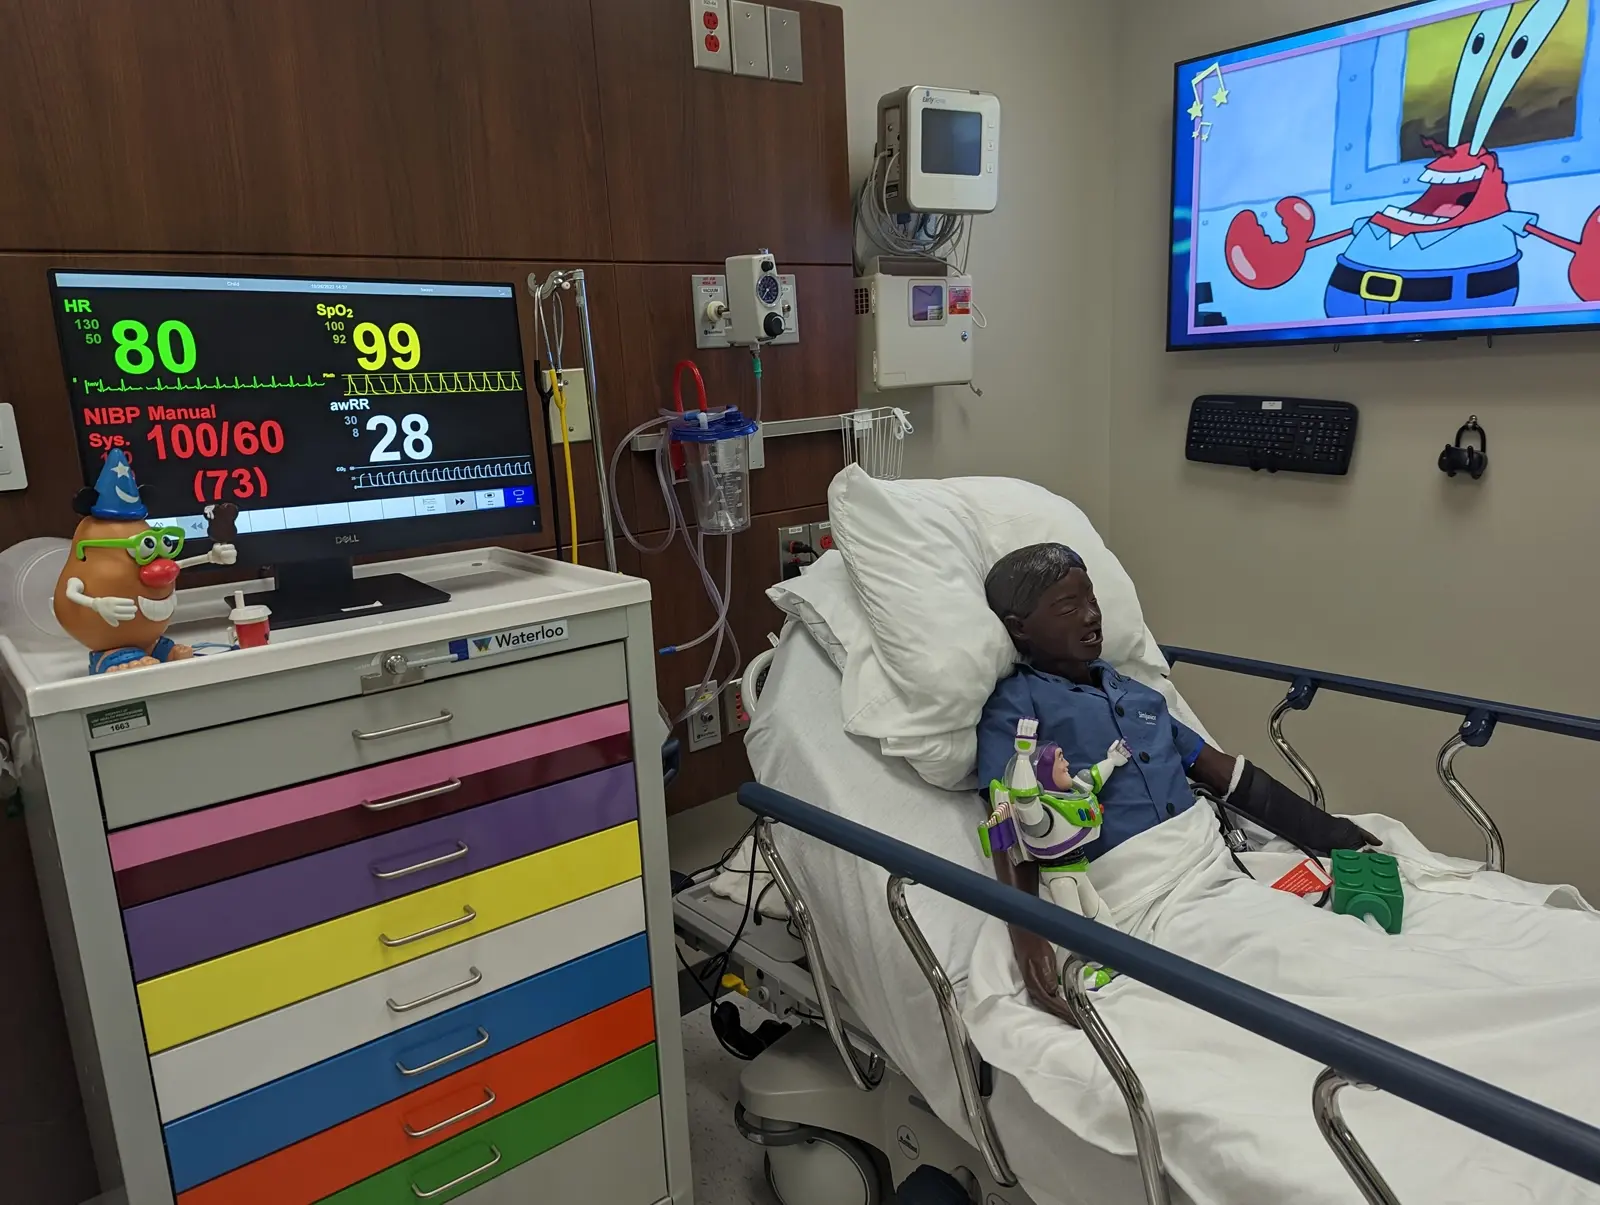 CAMLS A child is lying in a hospital bed, connected to medical monitors. A colorful set of drawers is beside the bed, and a monitor displays vital signs. The child is watching an animated cartoon on a wall-mounted TV. Medical equipment and cabinets are seen in the background.